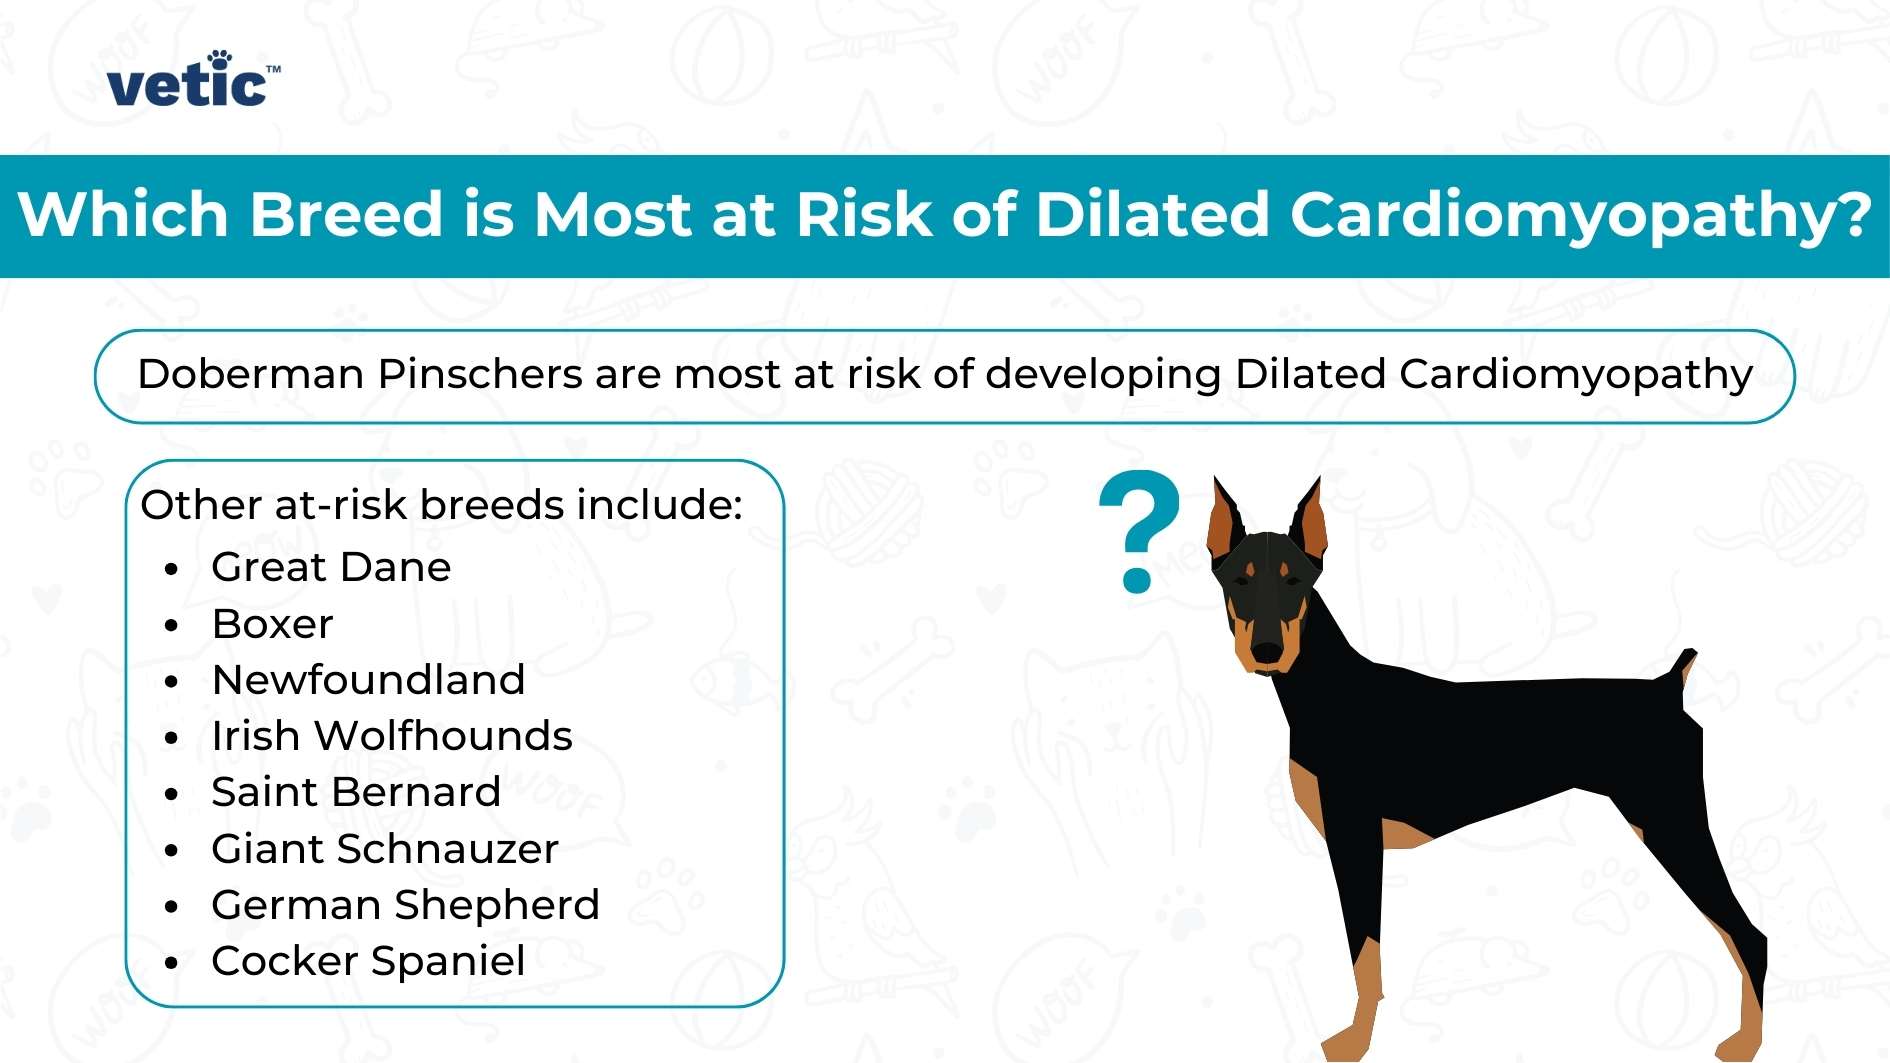 Doberman Pinschers are most at risk, and lists other breeds including Great Dane, Boxer, Newfoundland, Irish Wolfhounds, Saint Bernard, Giant Schnauzer, German Shepherd, and Cocker Spaniel. There is a graphic of a Doberman Pinscher alongside.